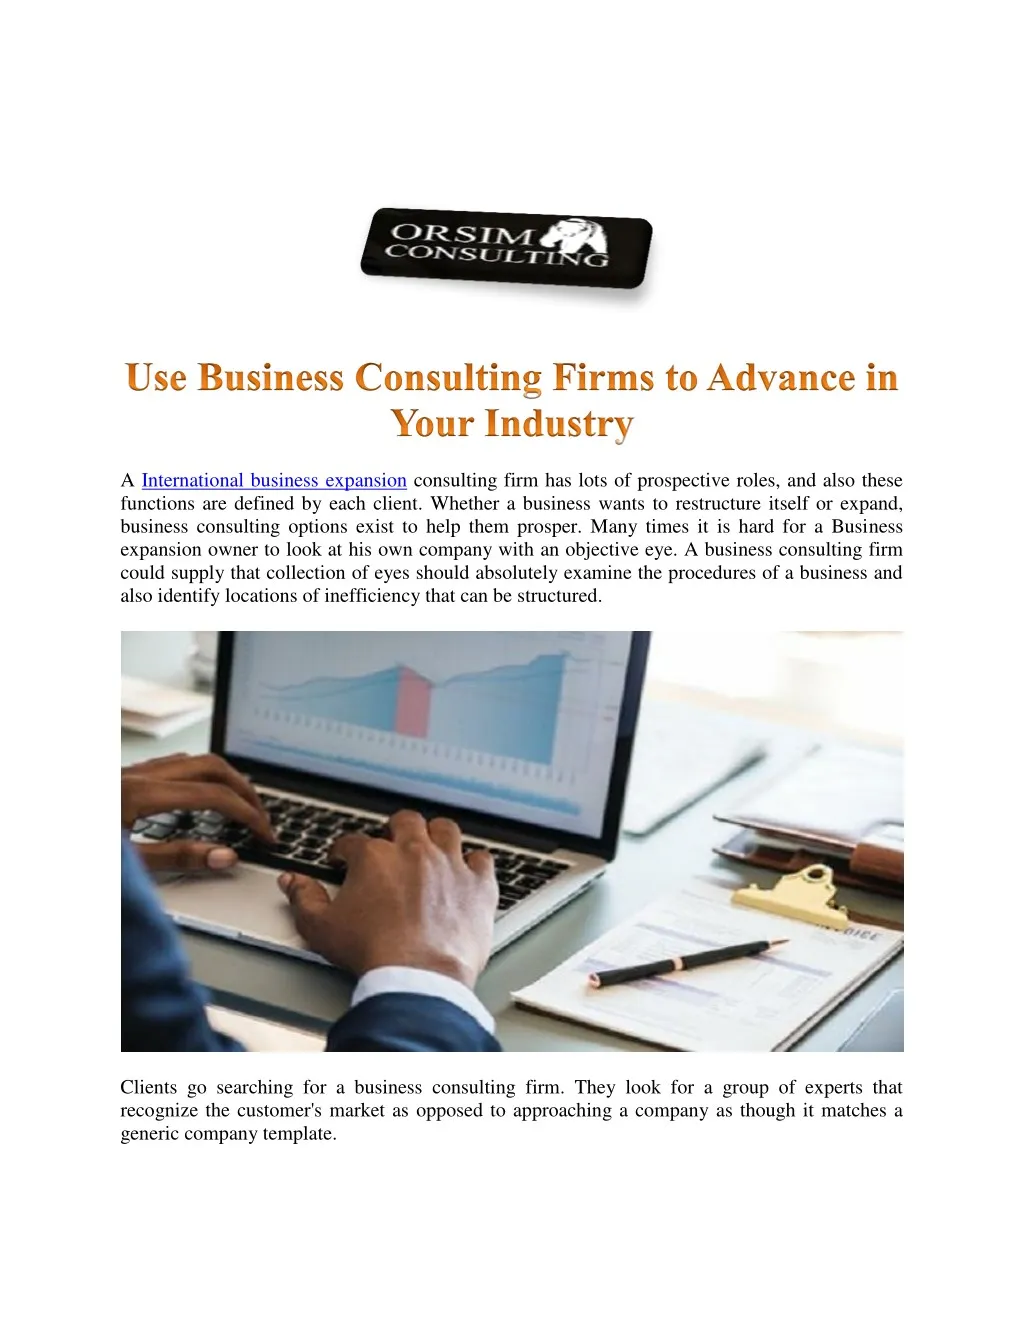 a international business expansion consulting